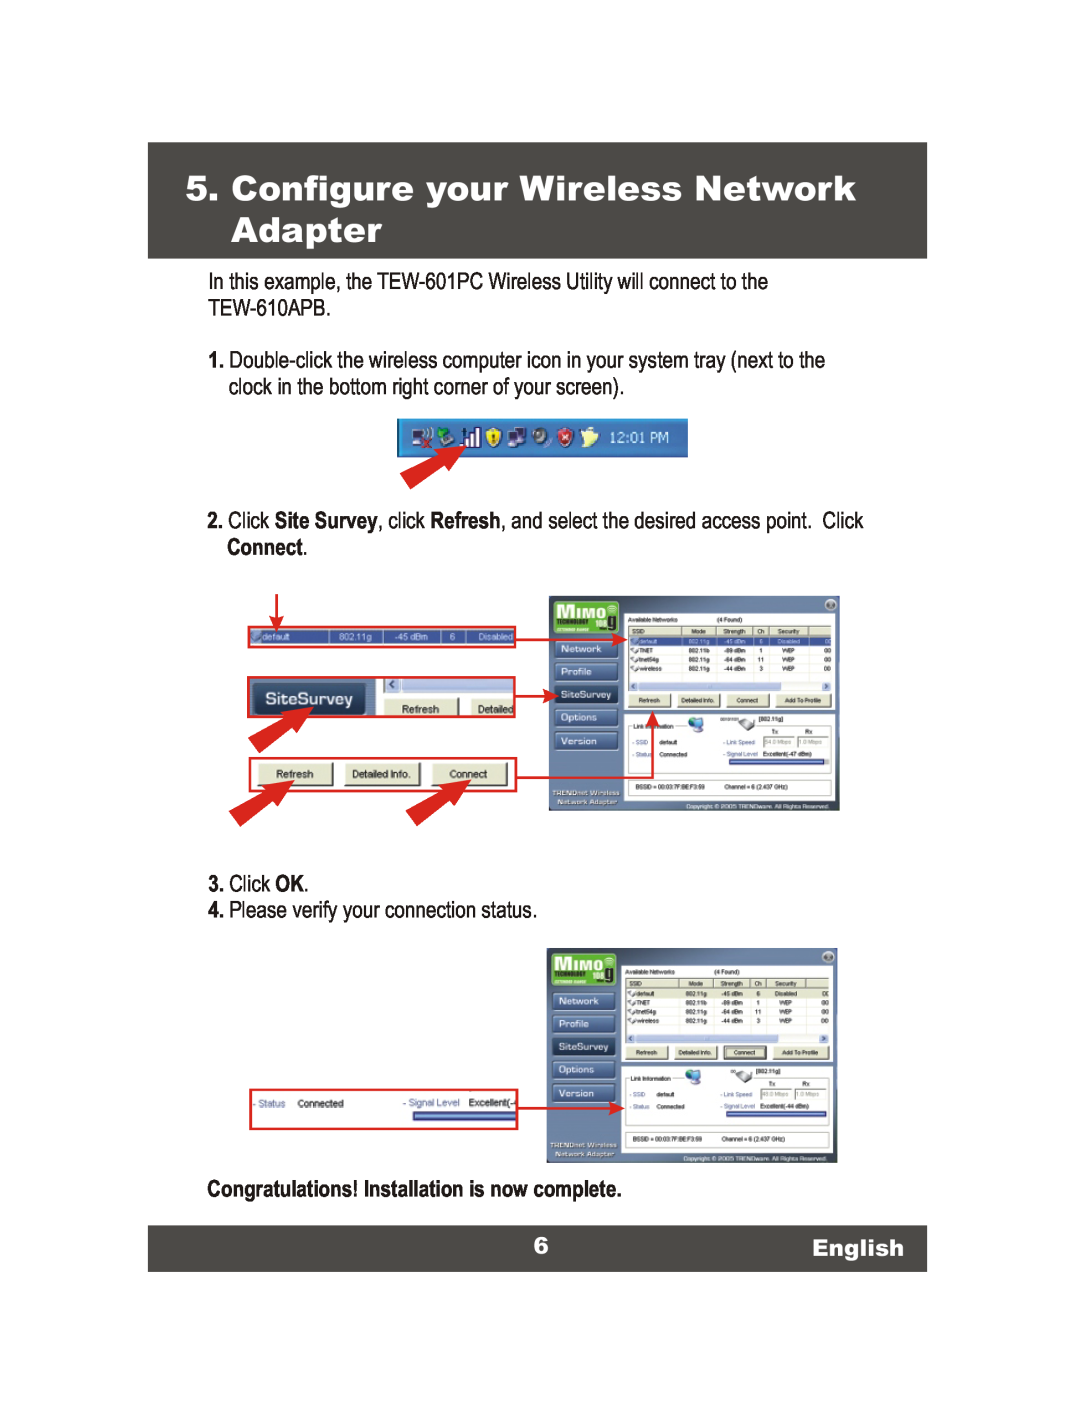 TRENDnet Wireless Access Point Configure your Wireless Network Adapter, Congratulations! Installation is now complete 